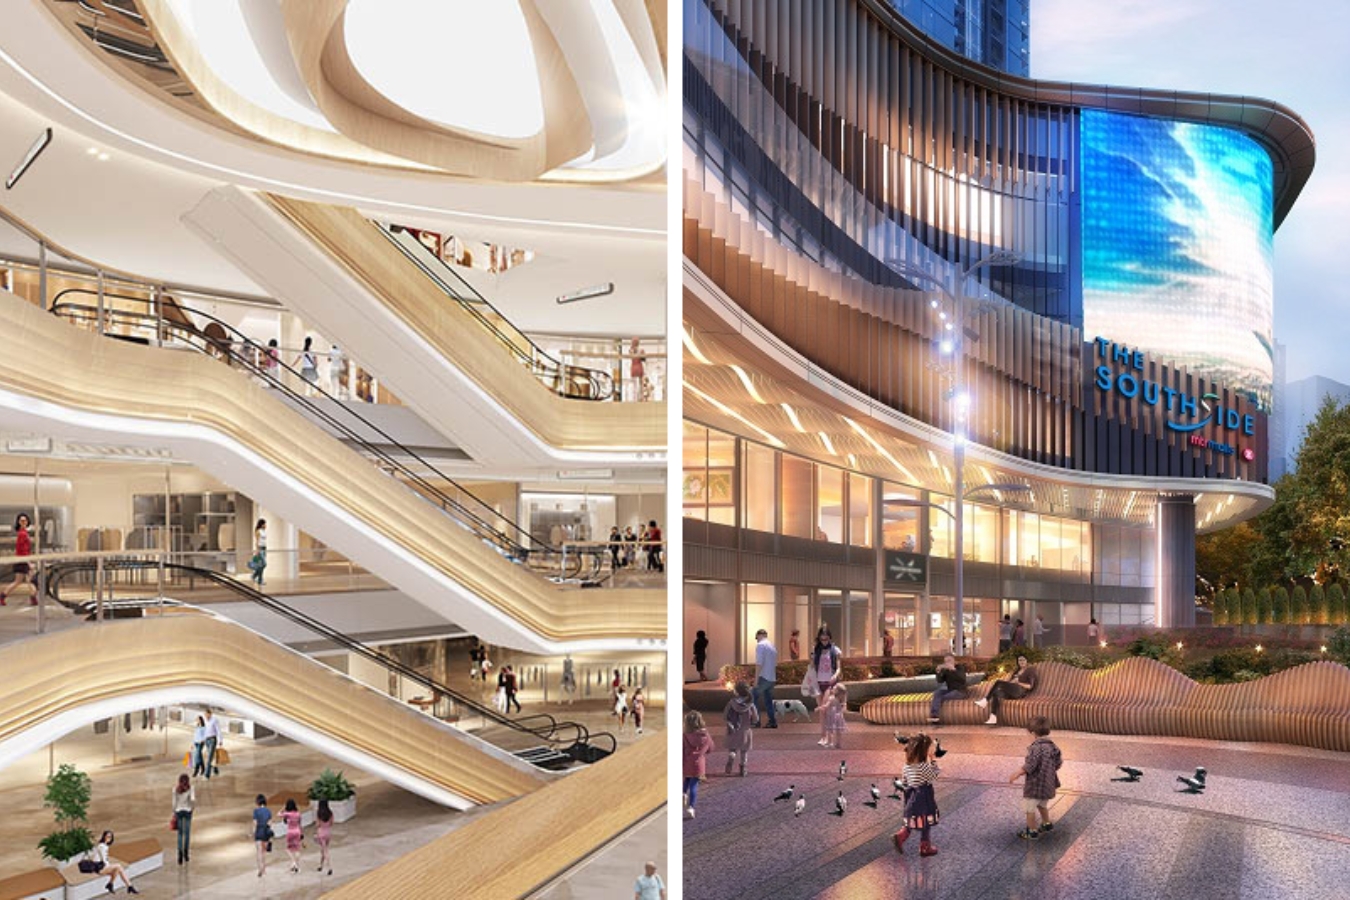 exteriors and interiors of the southside hong kong mall